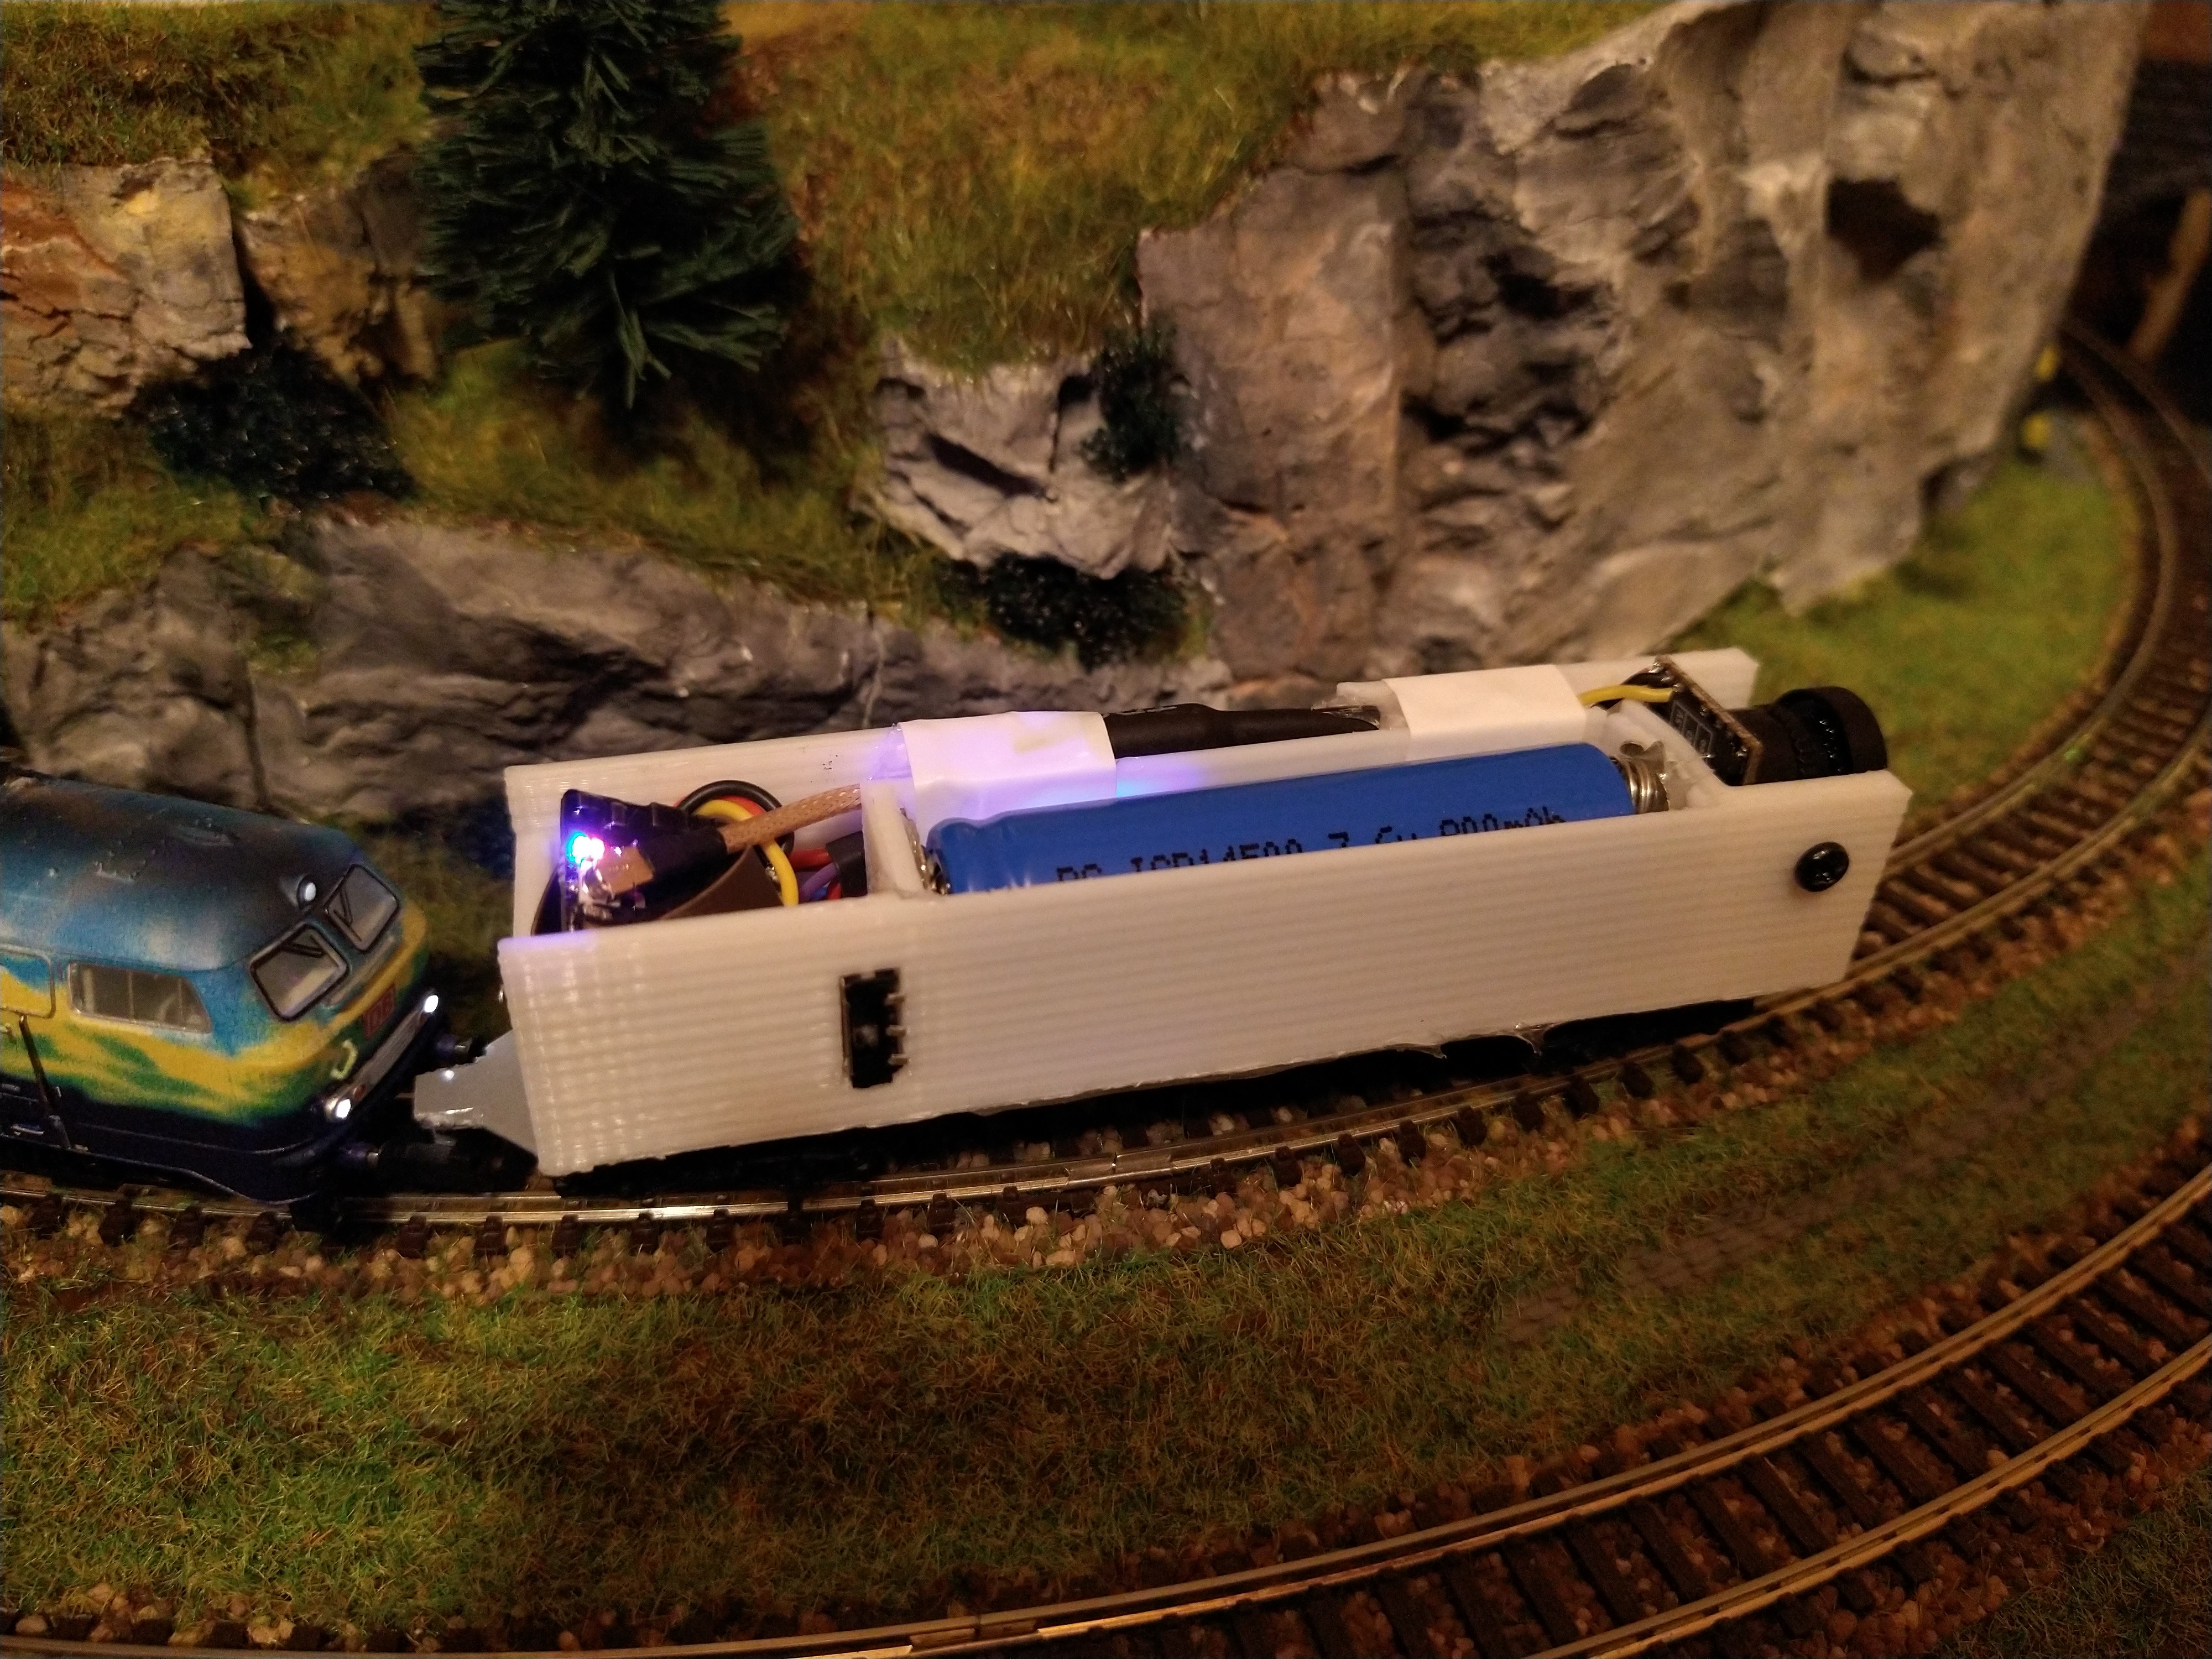 2022 FPV Contest: Get The Train Driver’s View In Your N-Scale Railway